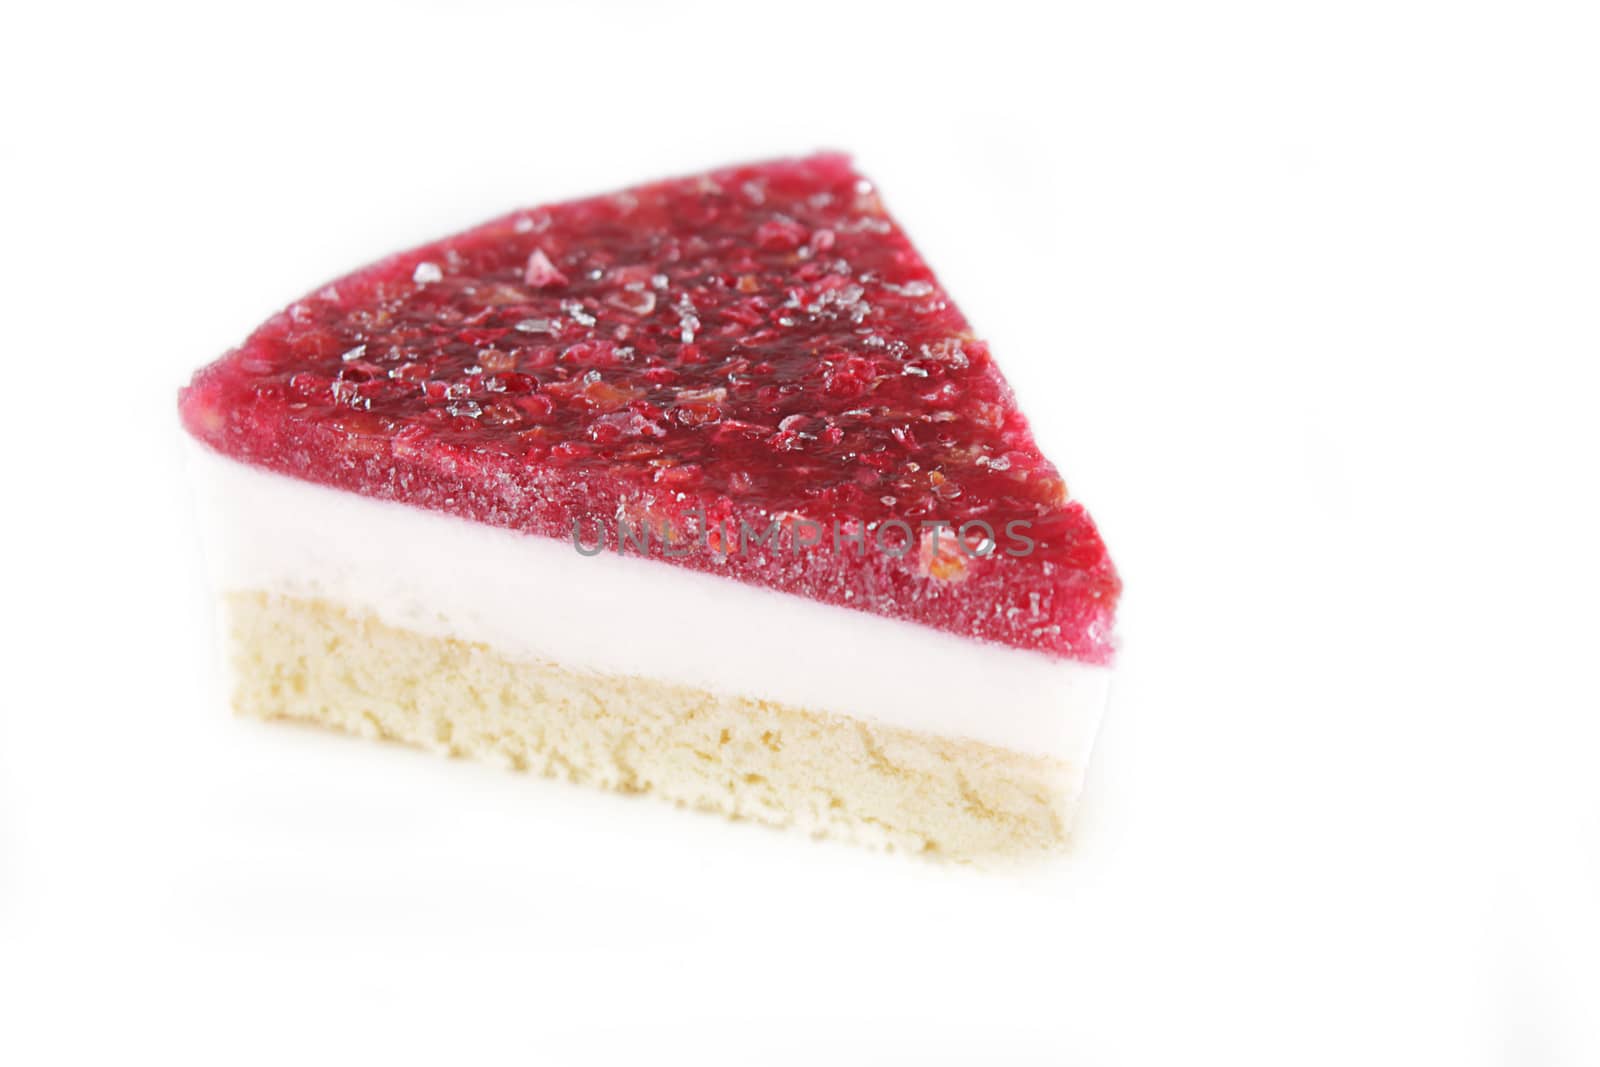 Piece of cheesecake with raspberry by Angel_a